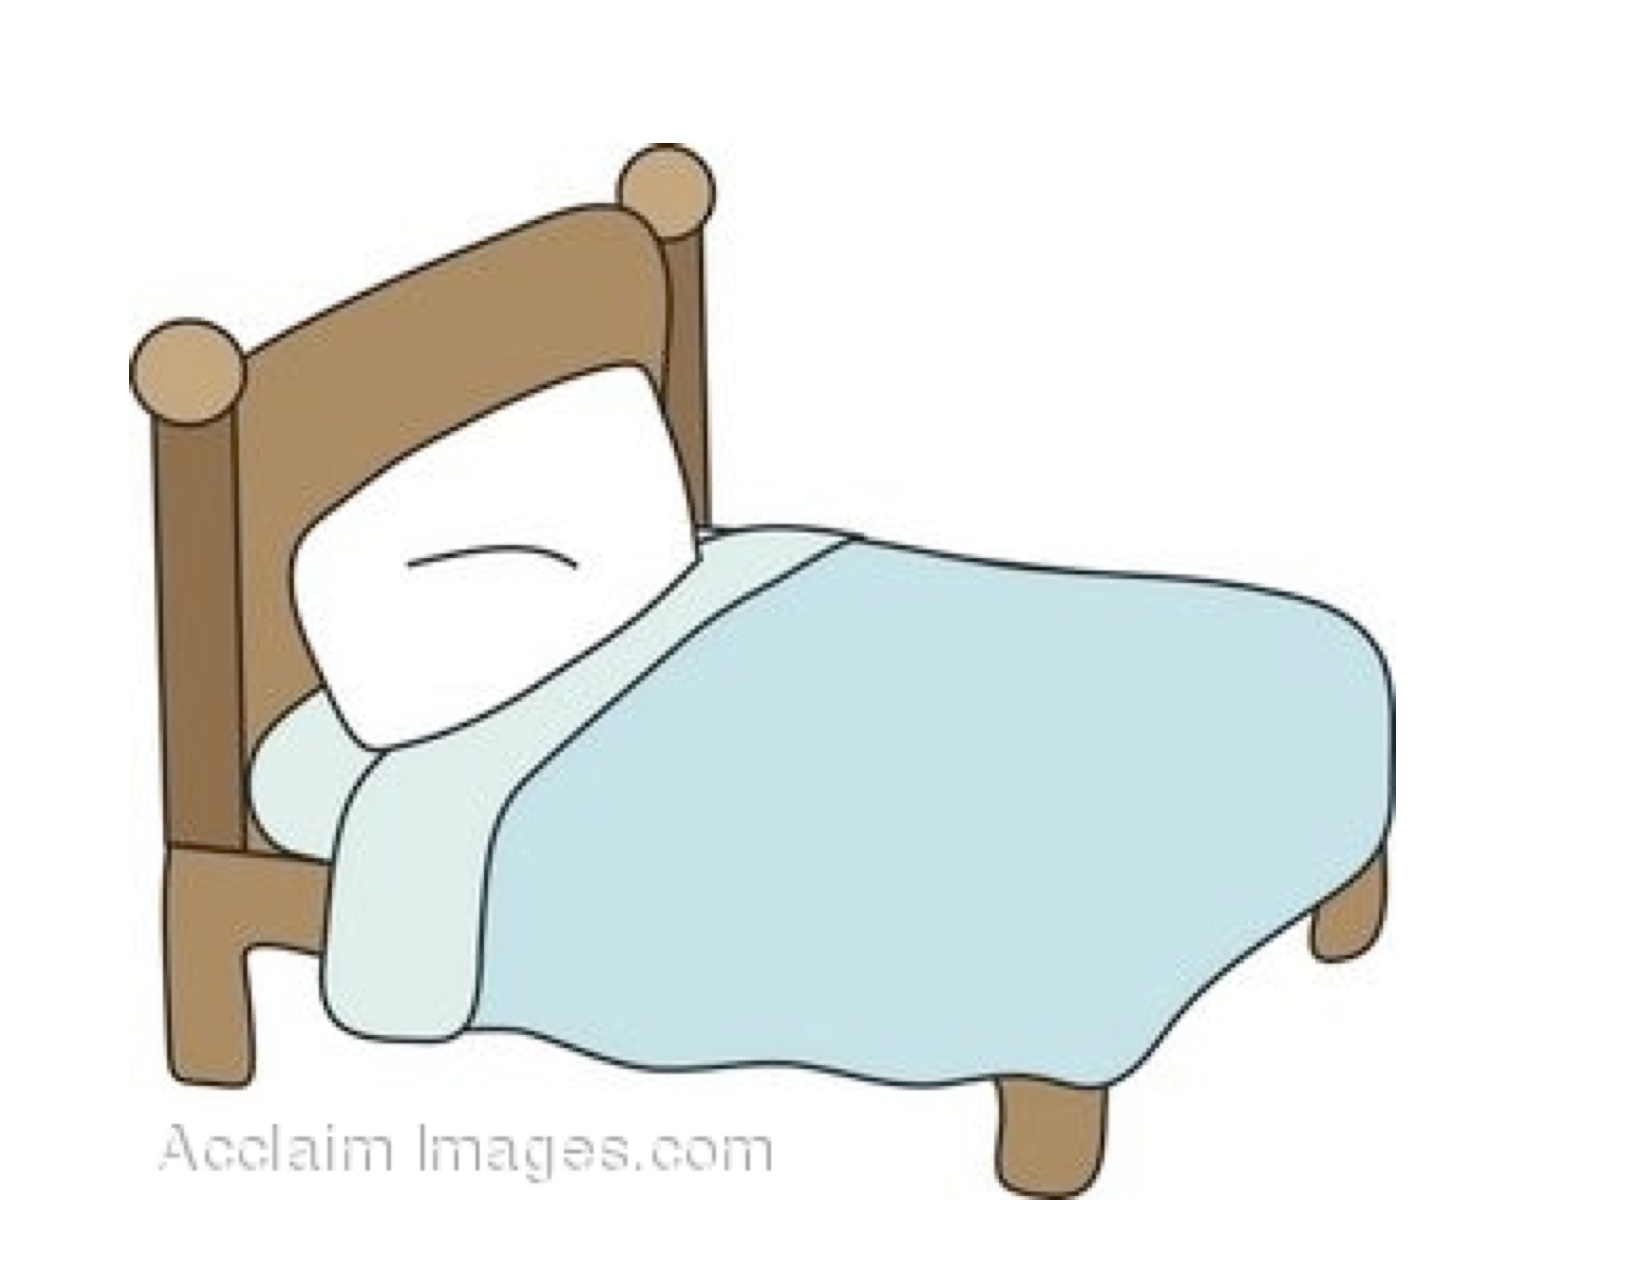 Bedding Making Bed Clip Art Clipartfest Clipart Bugs.